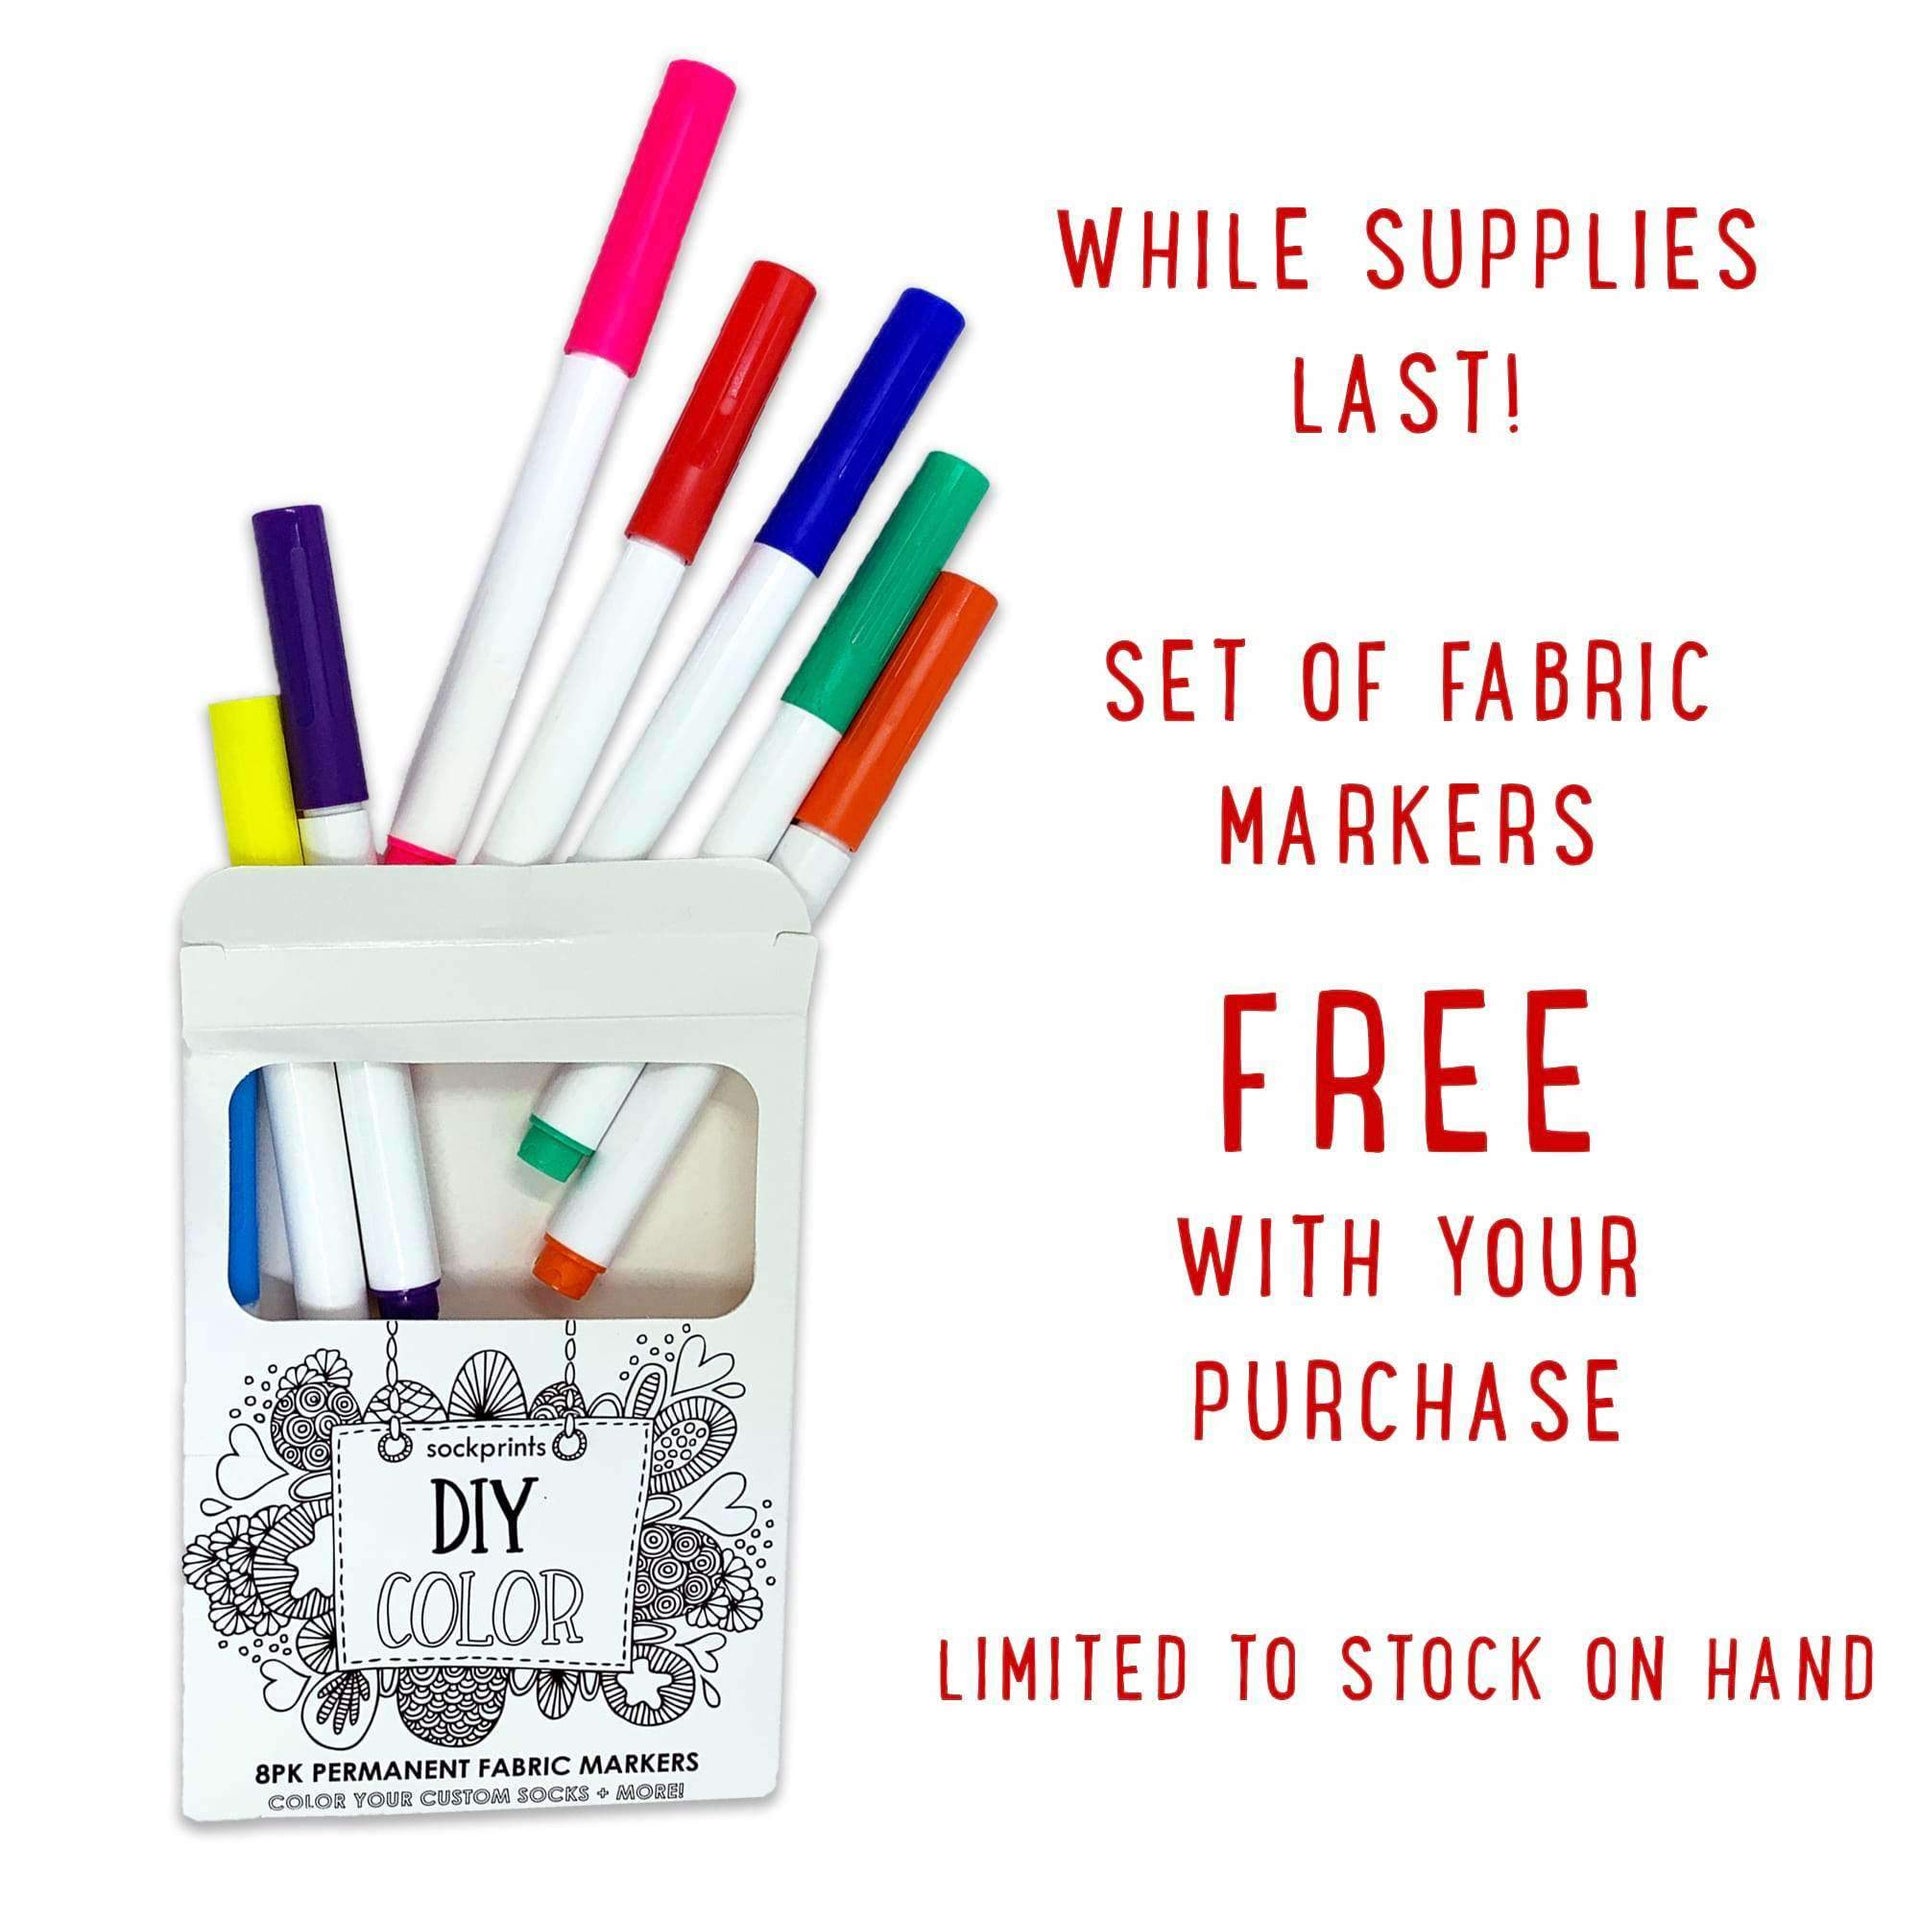 Fabric markers, free while supplies last, with purchase of color in photo socks.